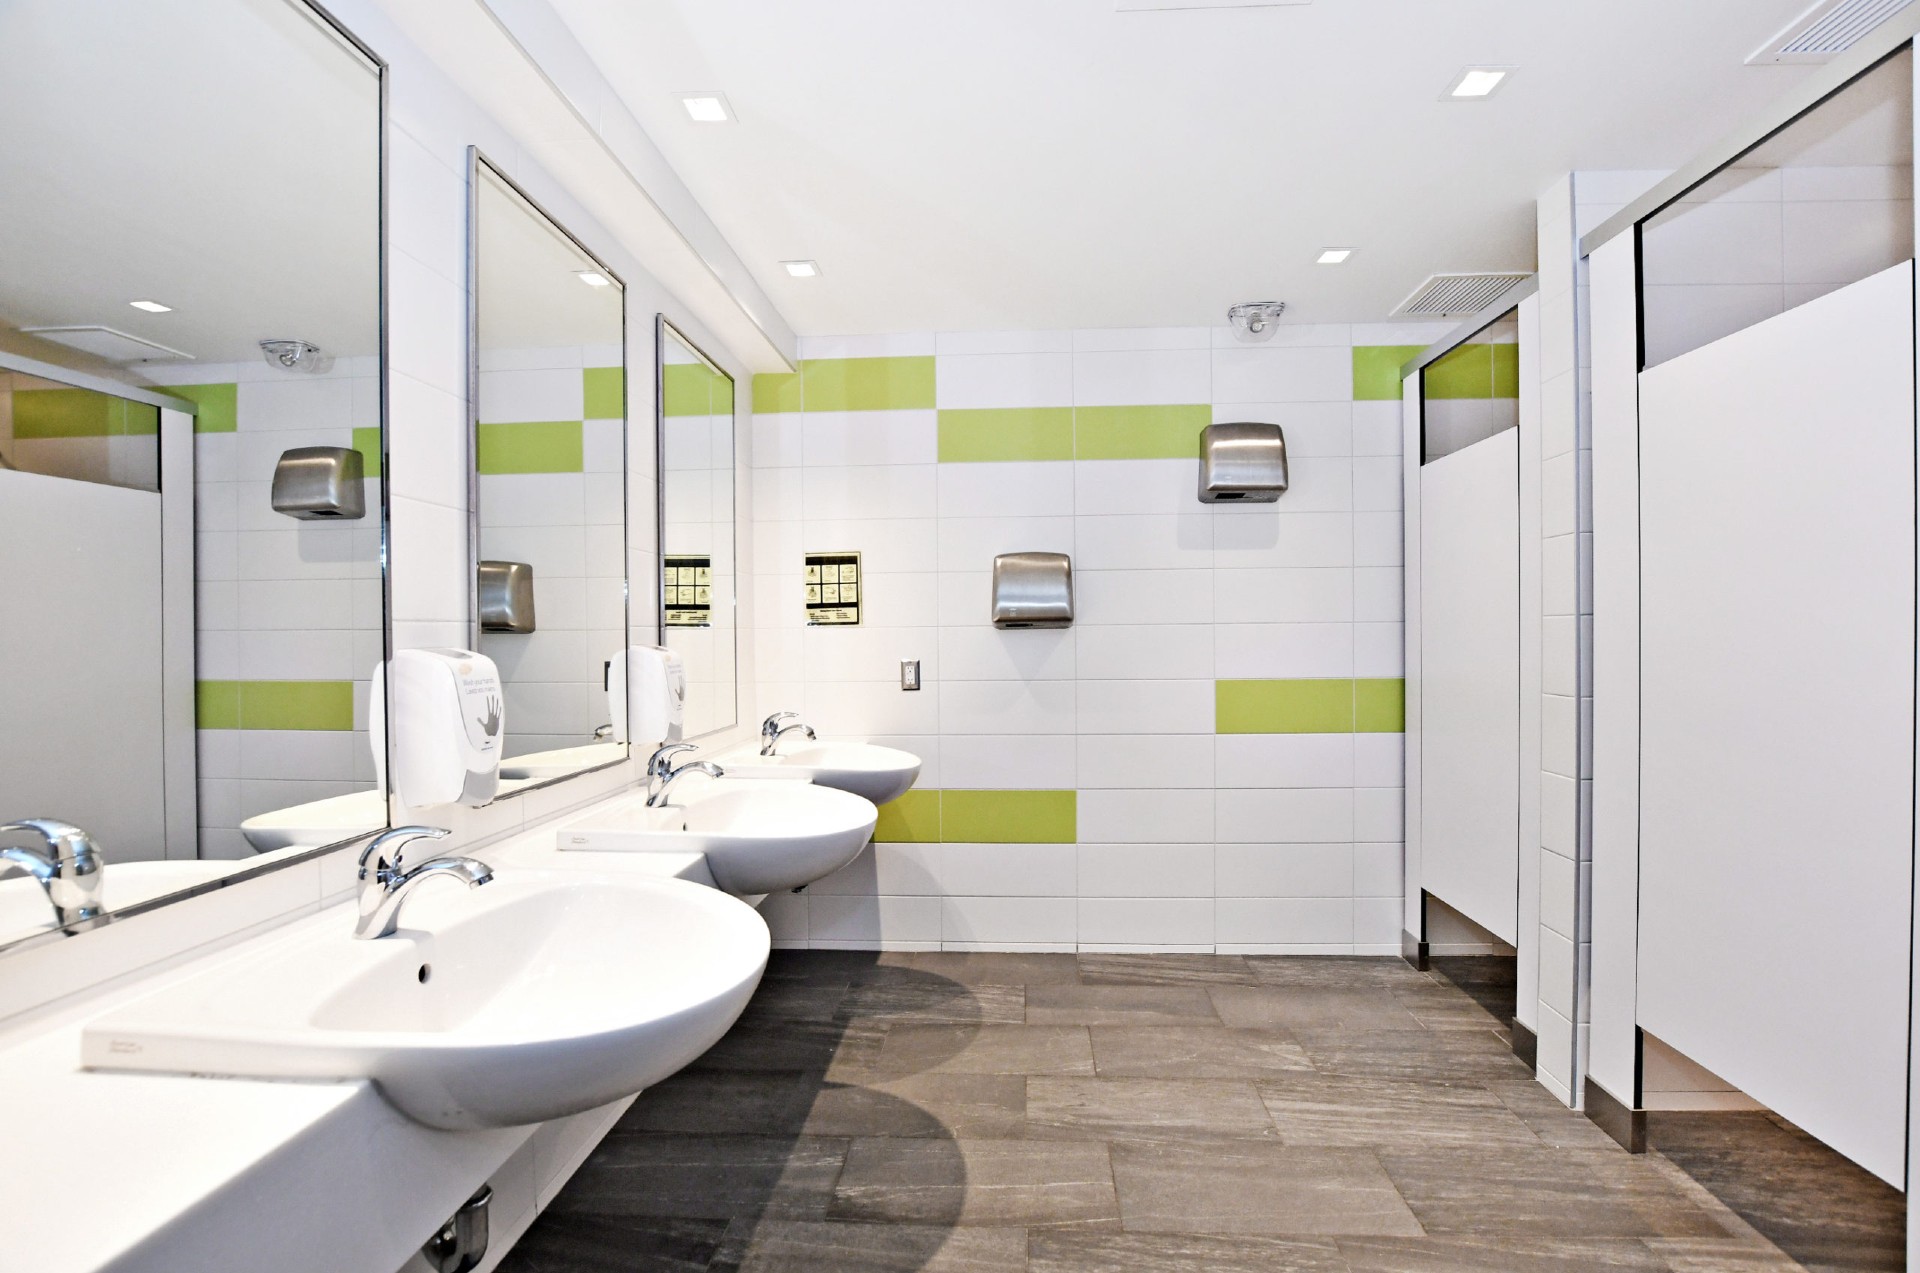 Picture of the shared washroom in Vanier building.